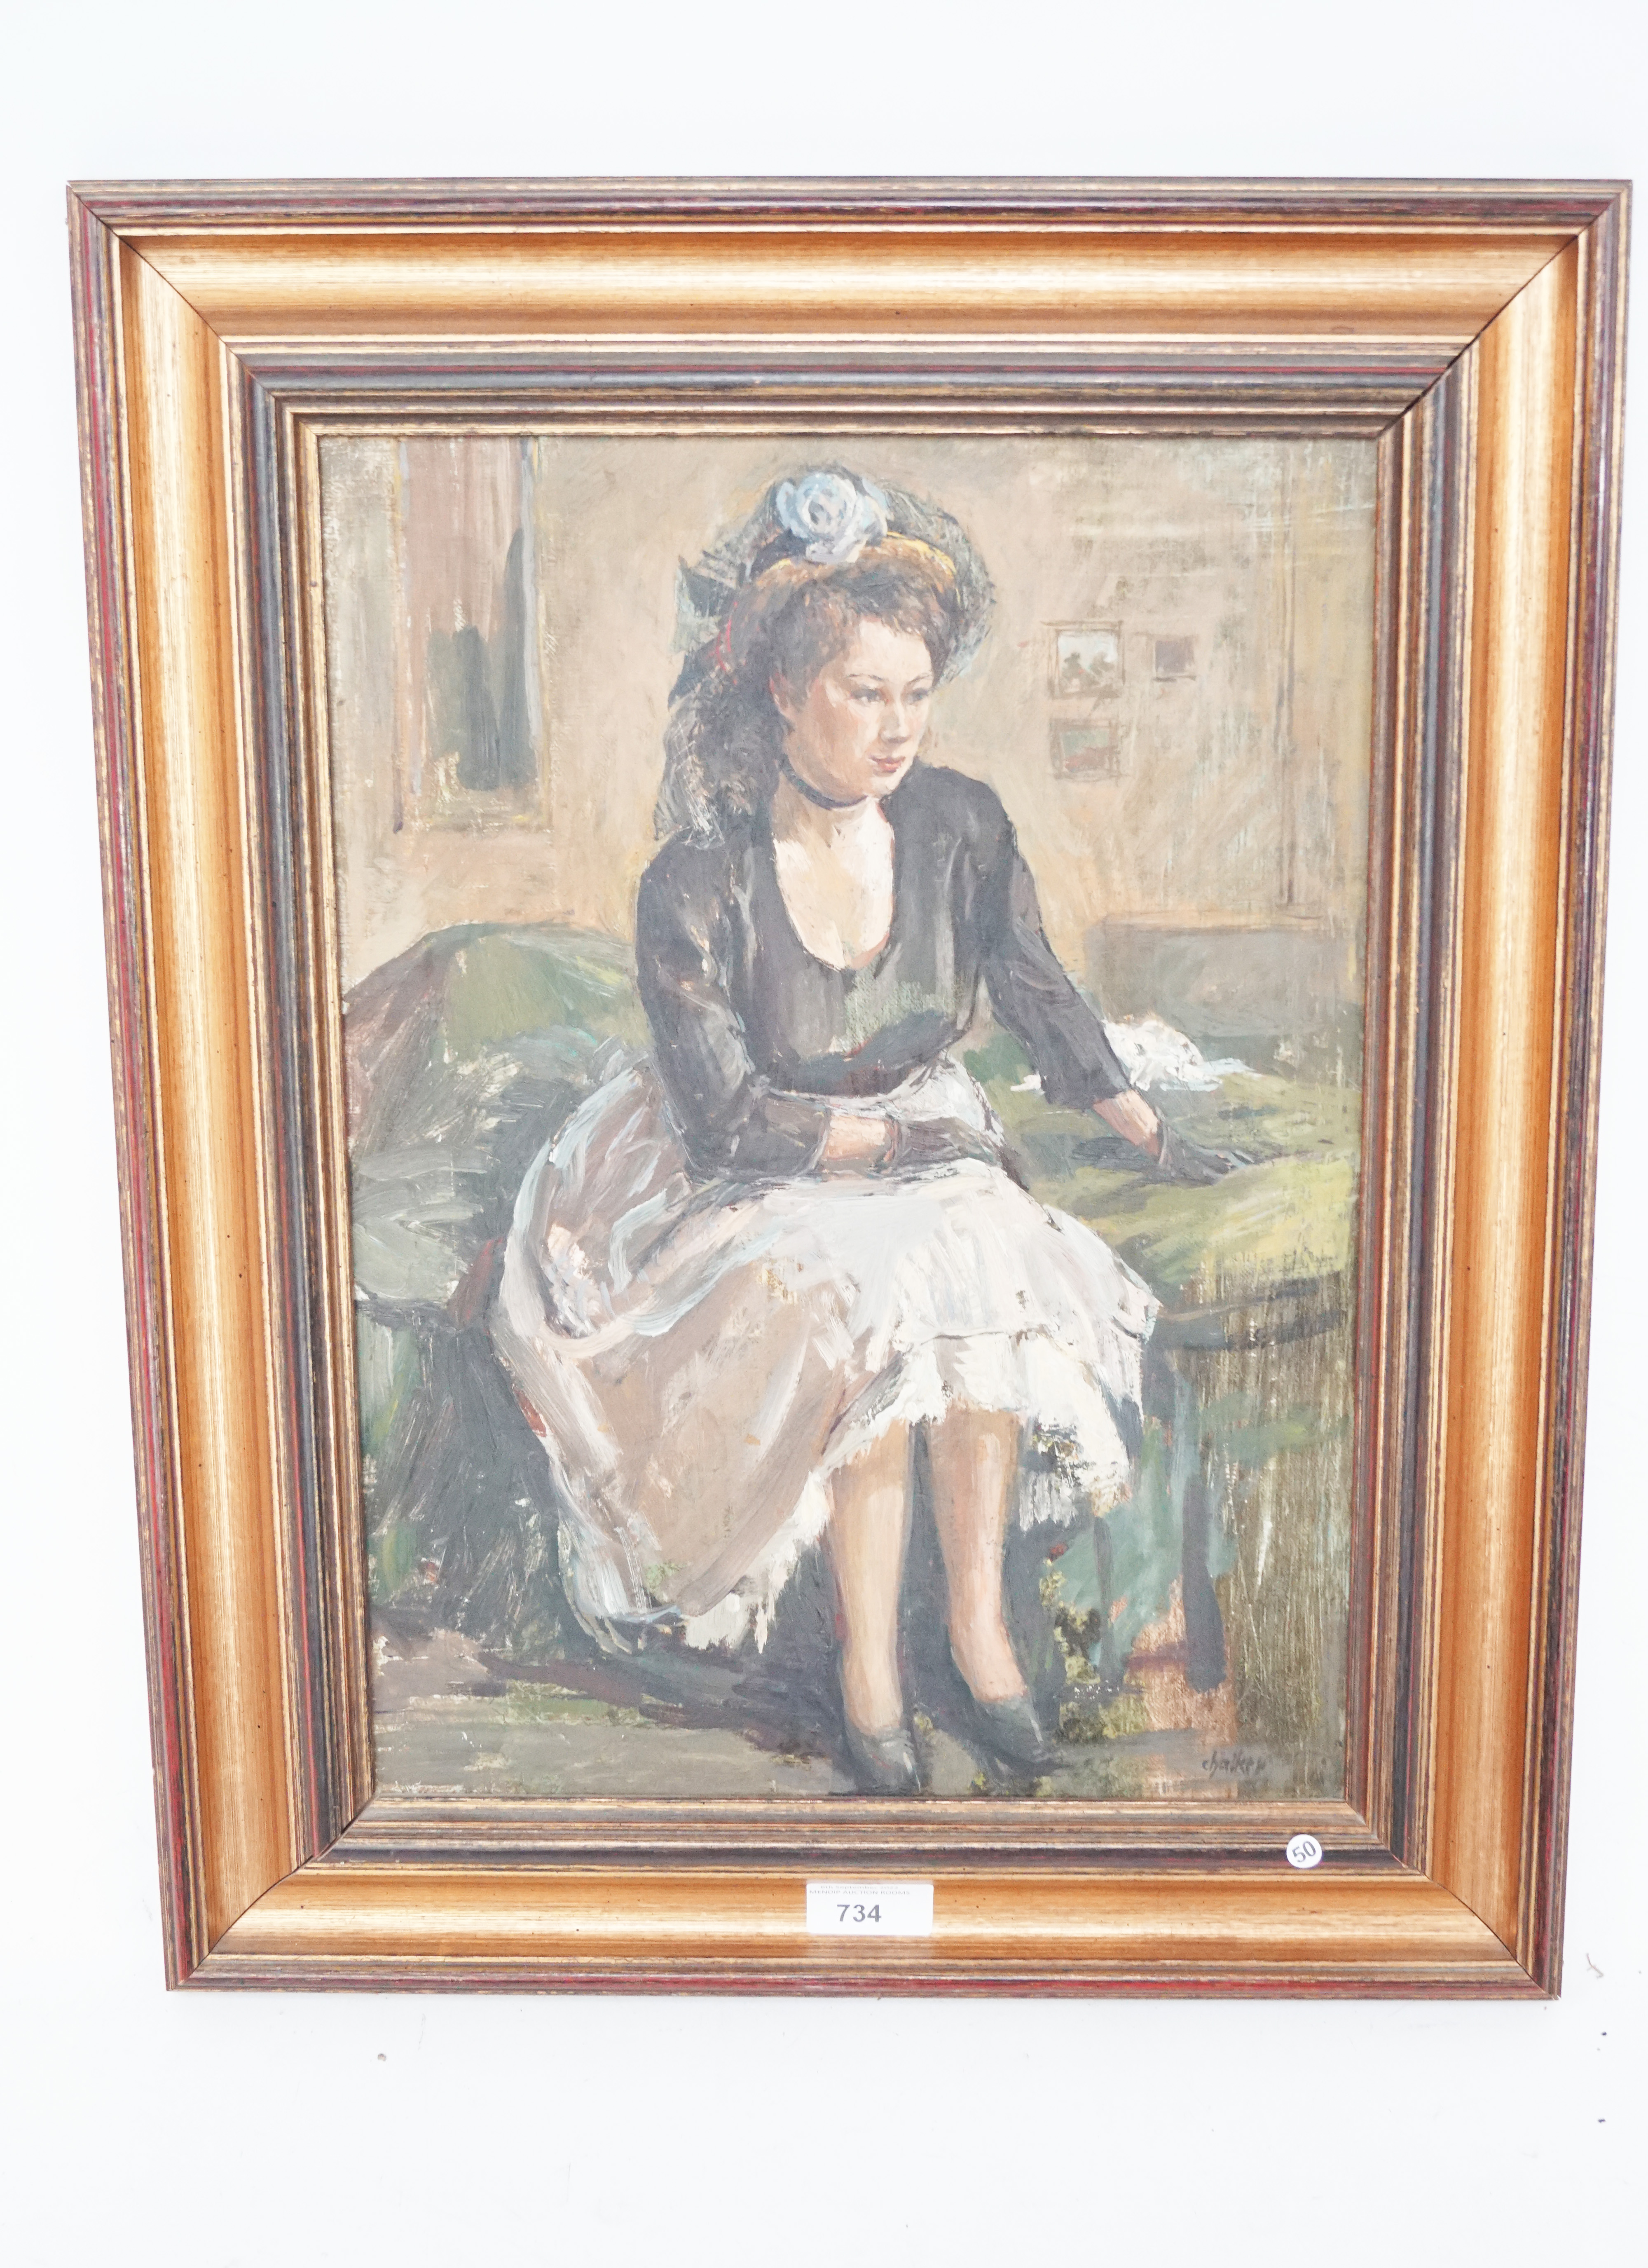 Jack Bridger Chalker. An oil on board painting depicting a seated lady